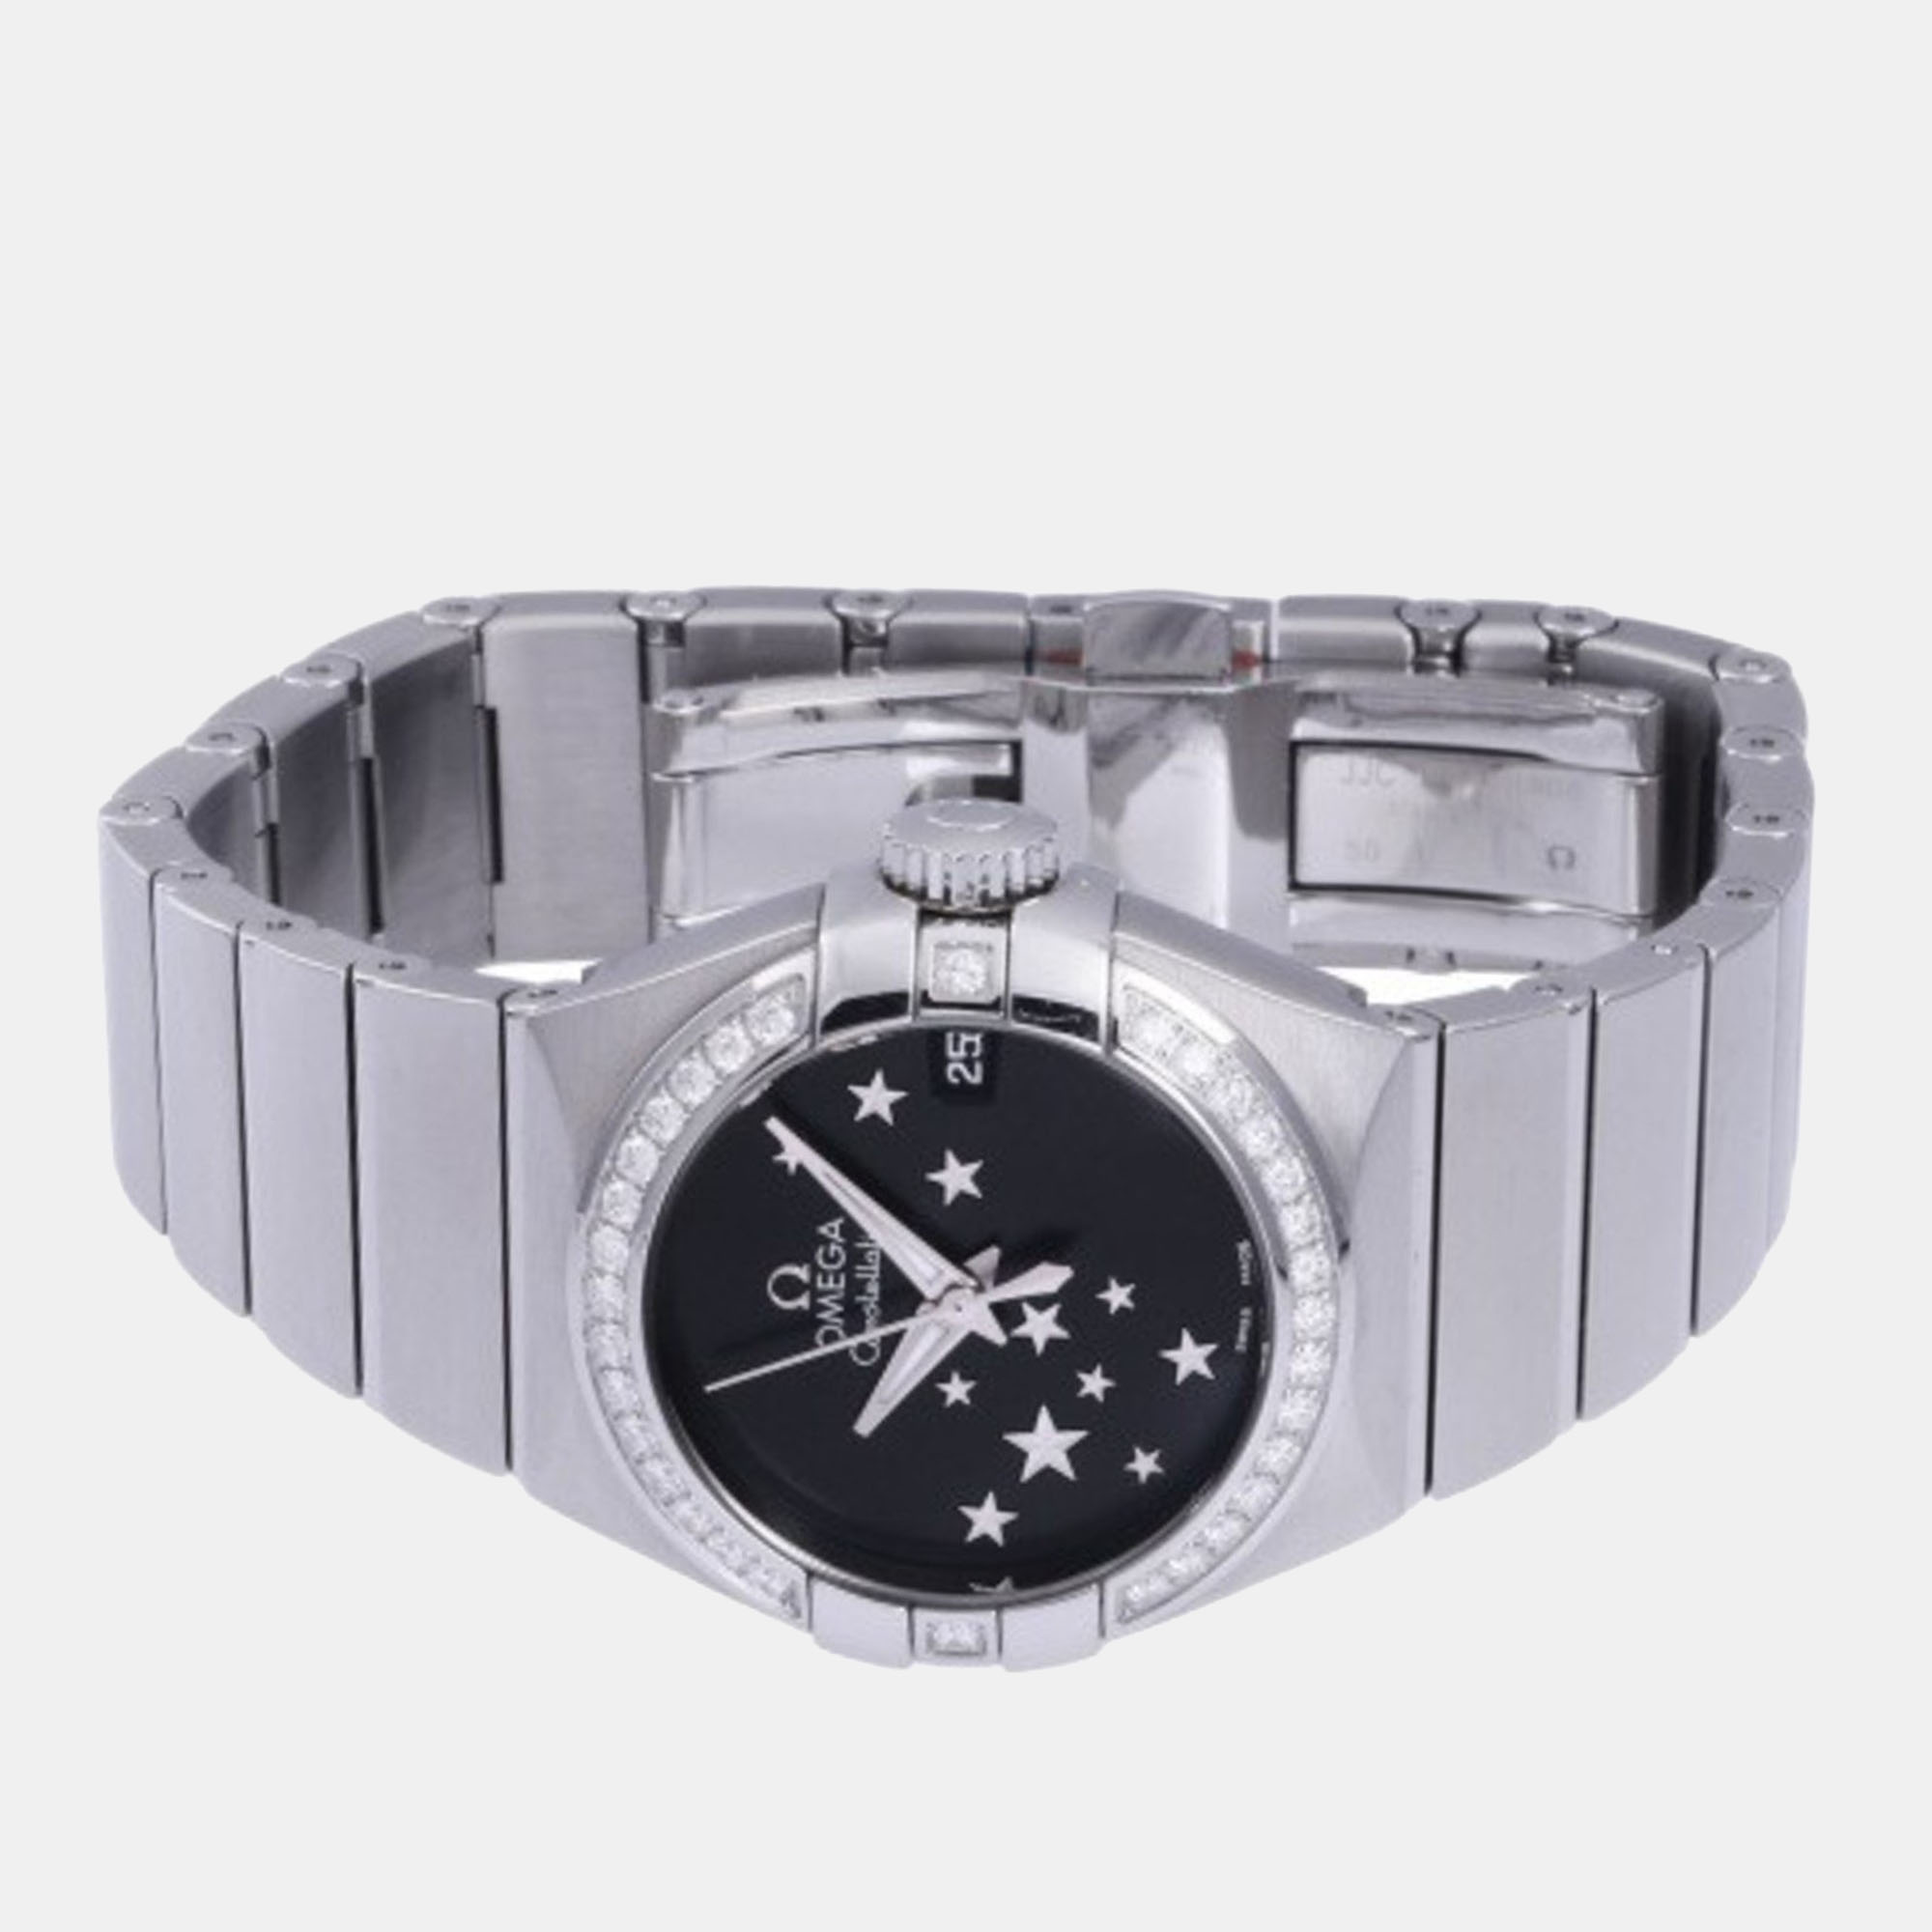 

Omega Black Stainless Steel Constellation 123.15.27.20.01.001 Automatic Women's Wristwatch 27 mm